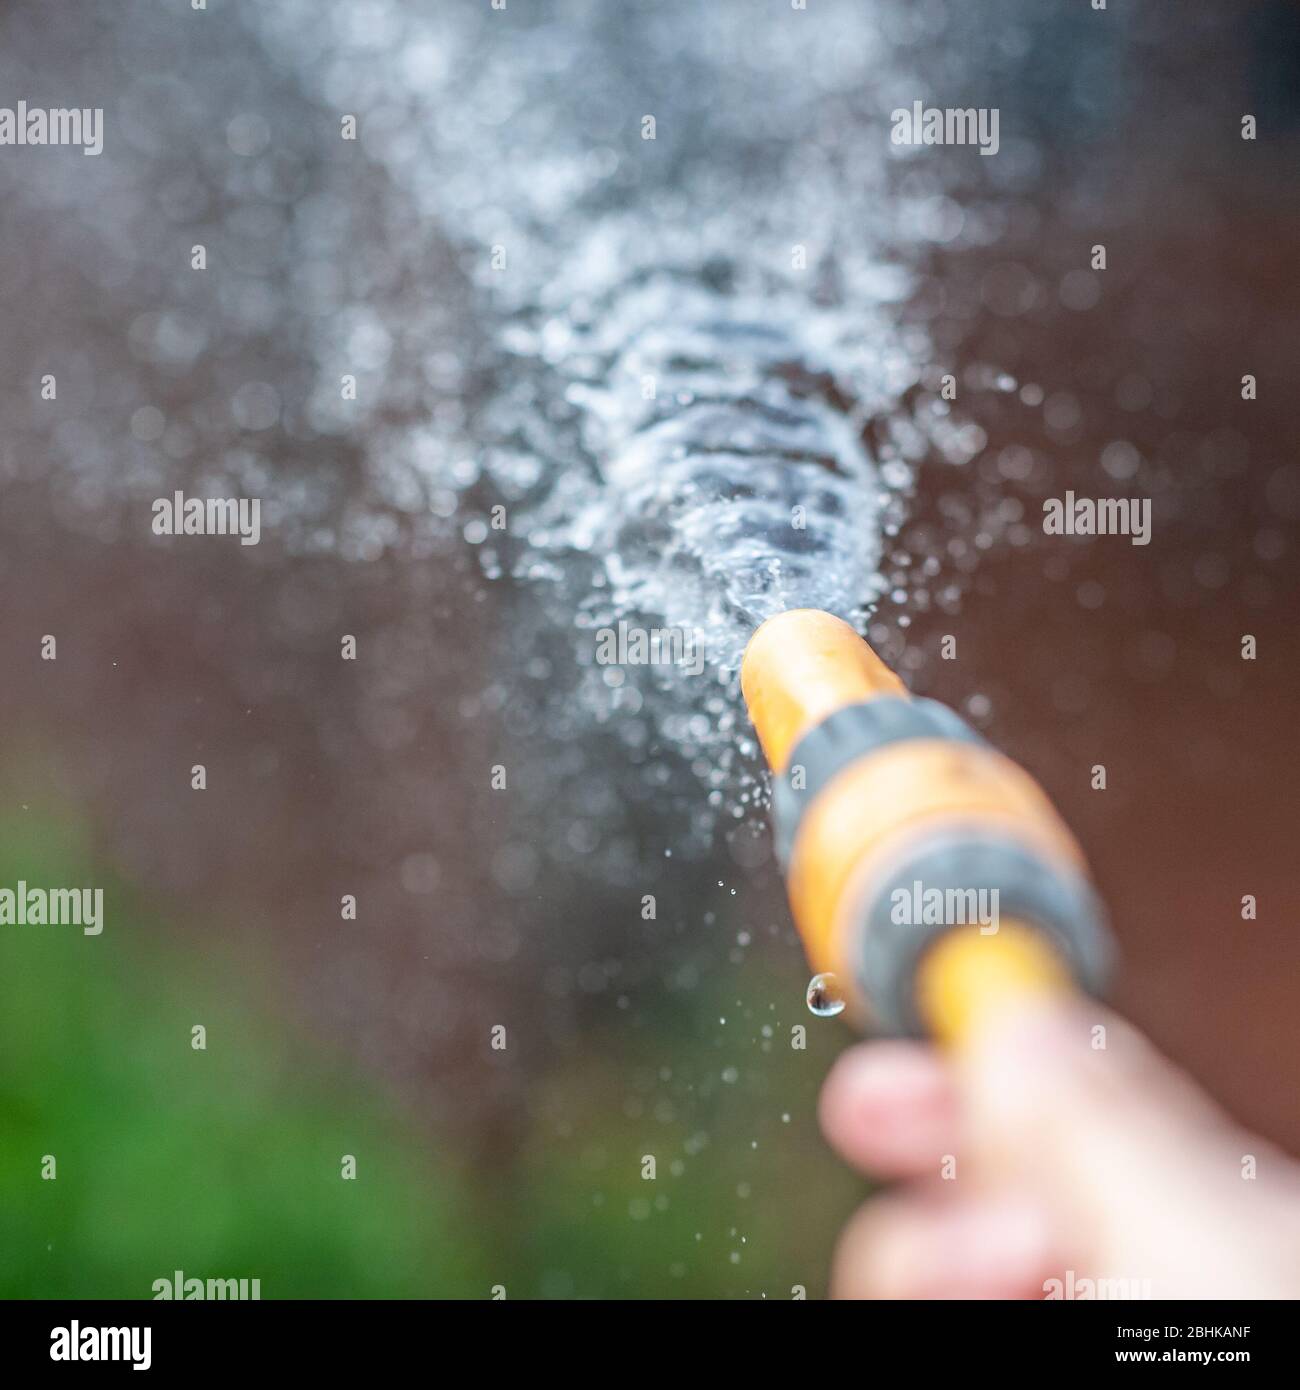 Watering a garden with spray from a hosepipe Stock Photo